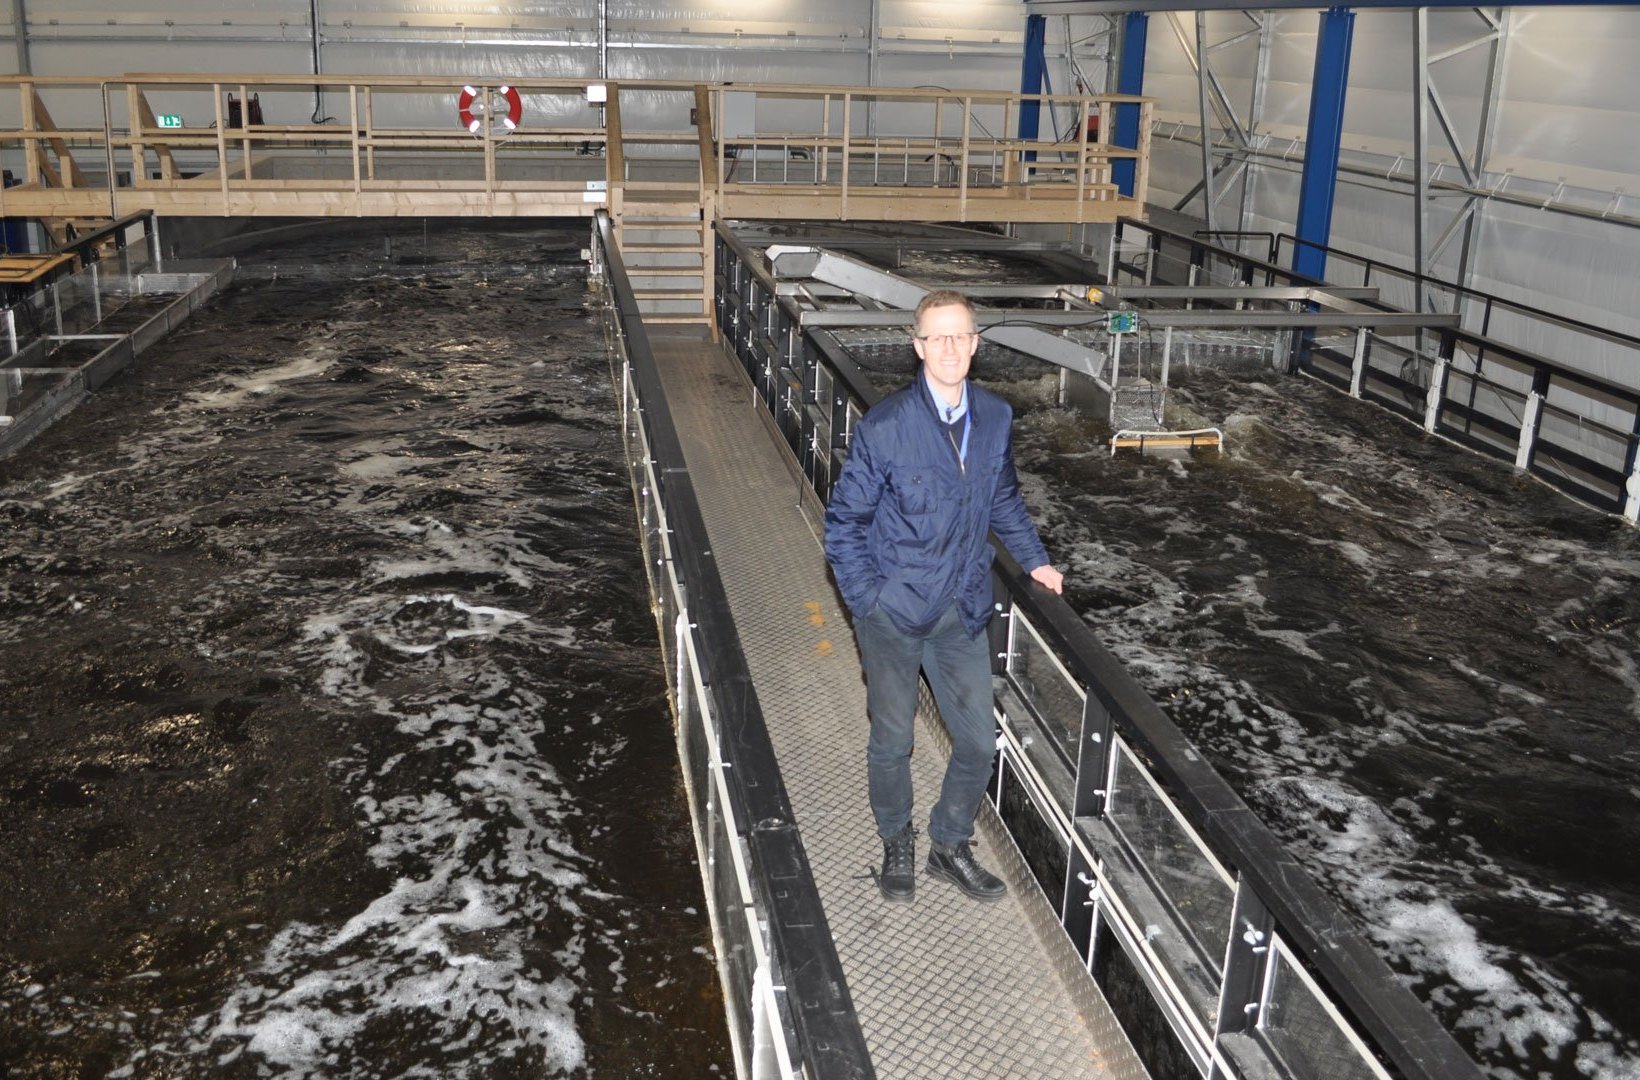 Vattenfall R&D test facility for studying the behaviour of fish in running water 